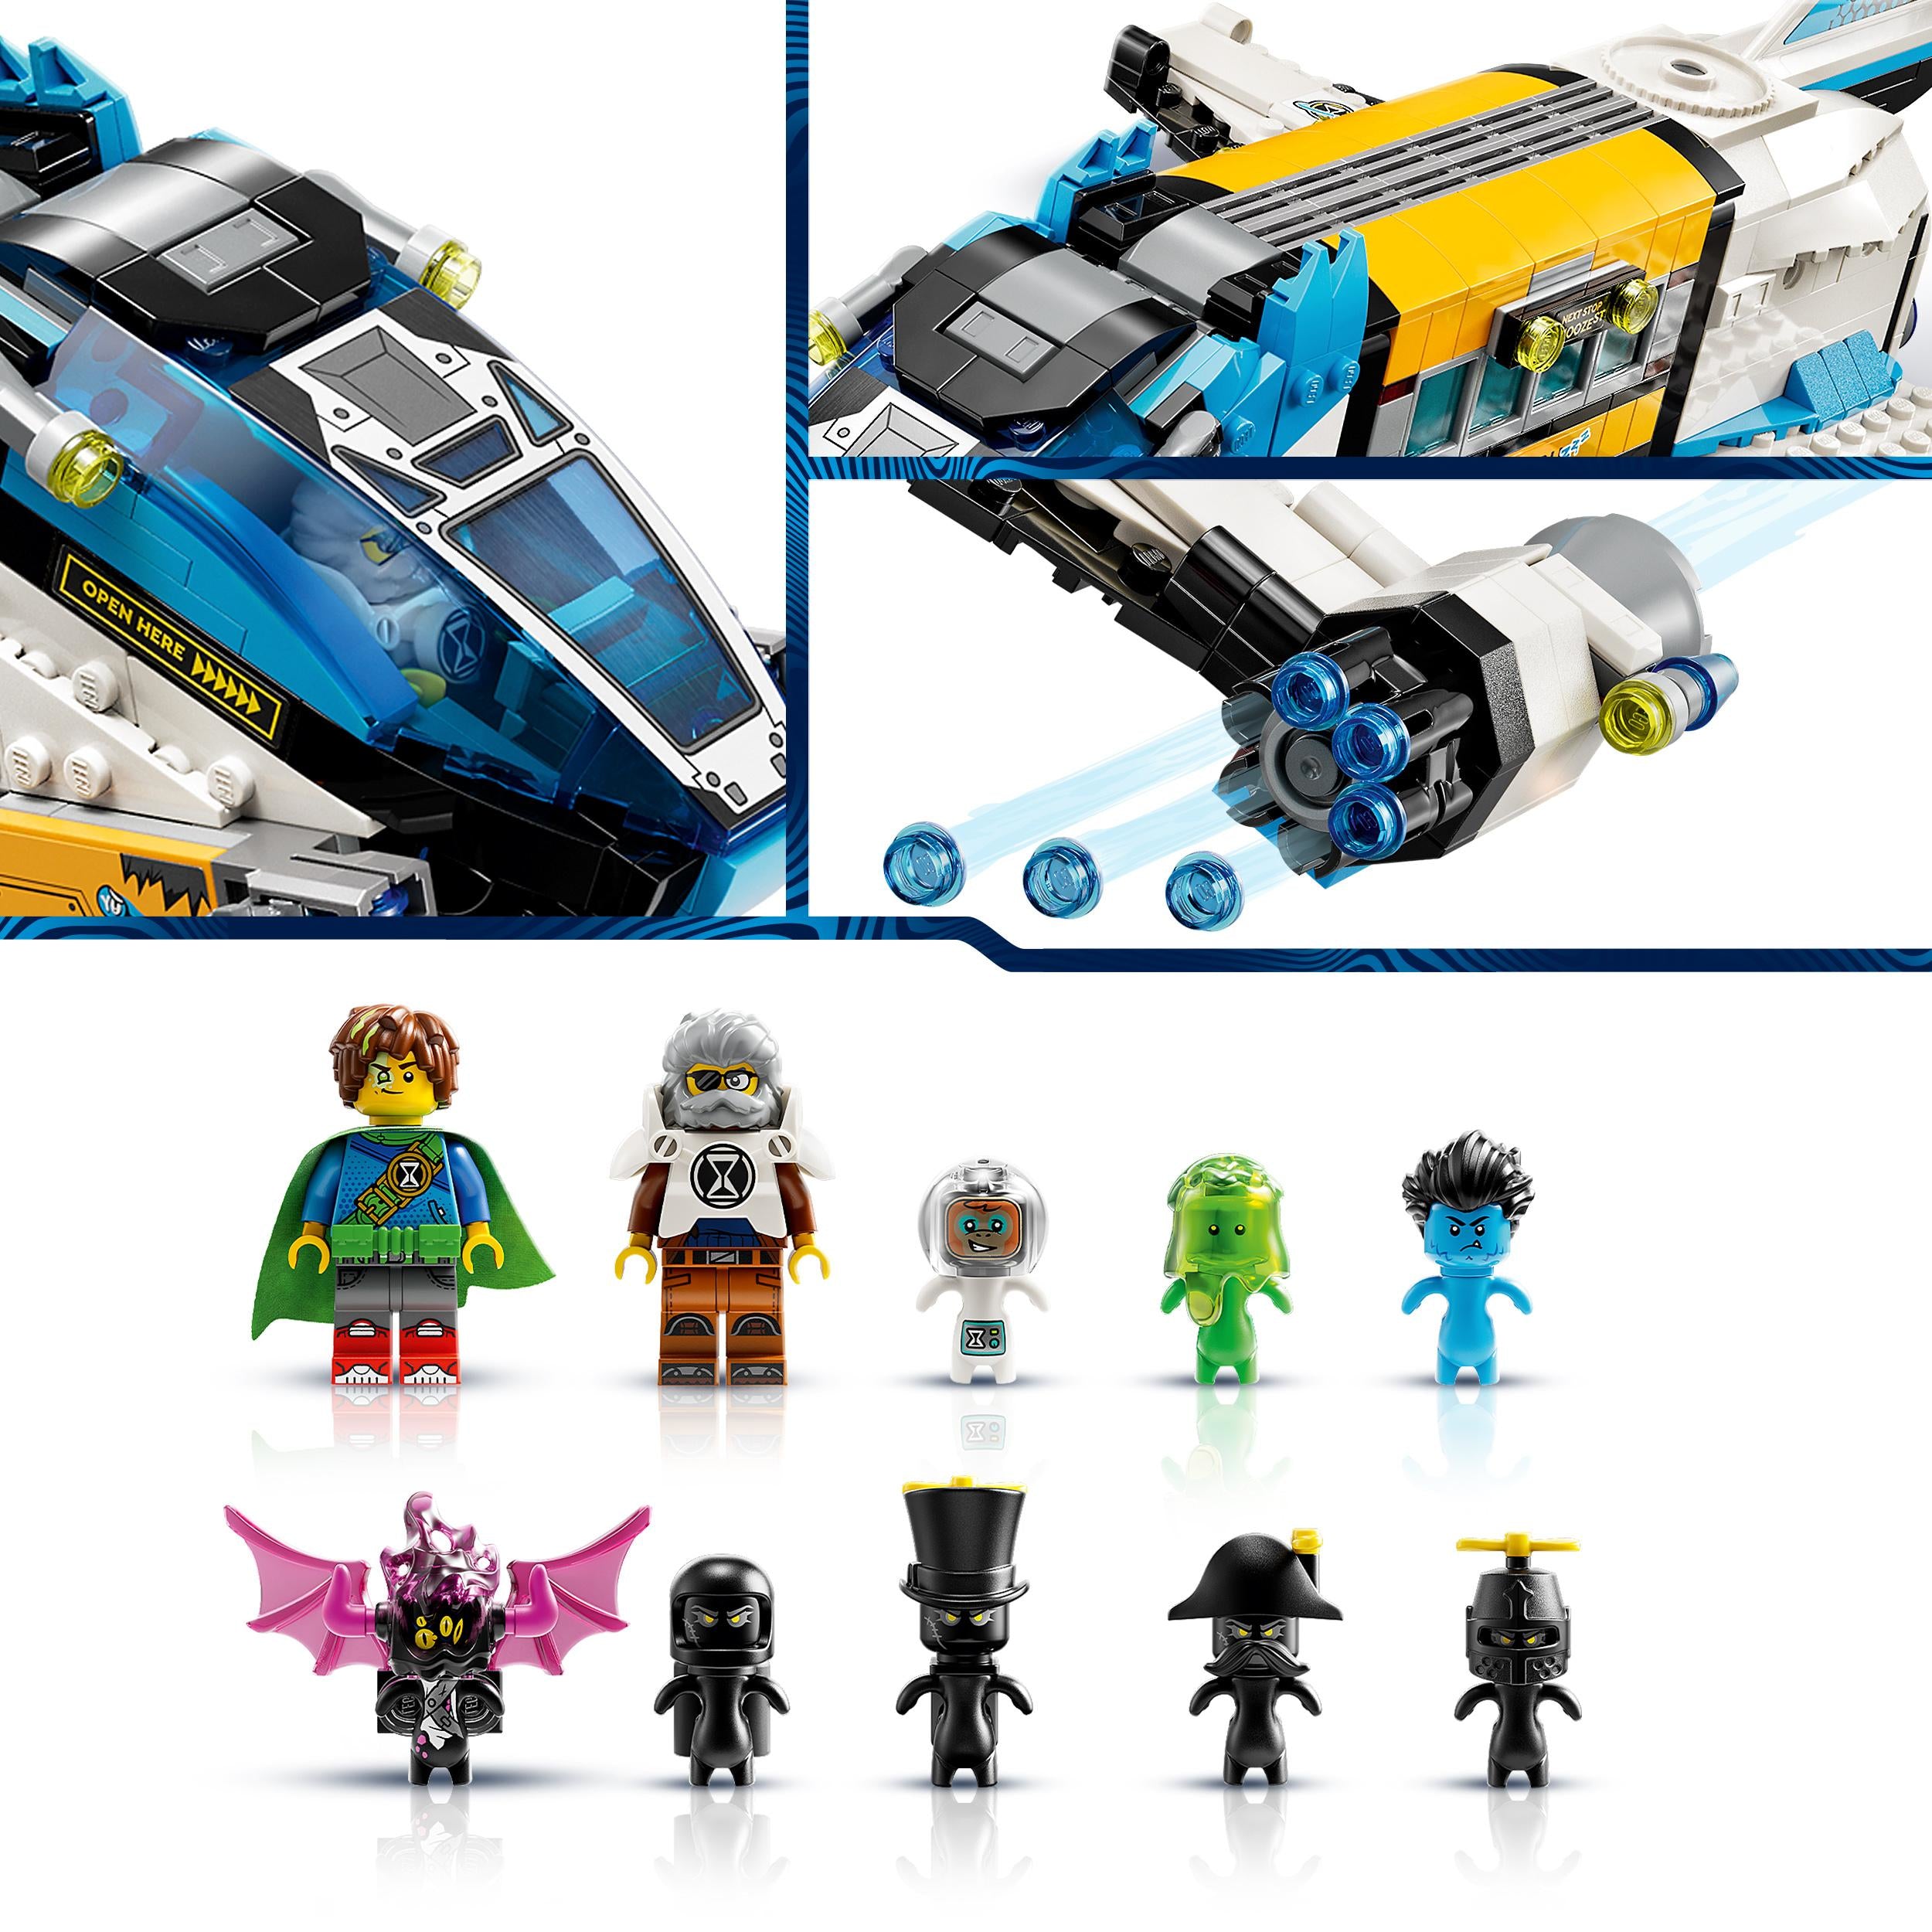 LEGO 71460 DREAMZzz Mr. Oz's Spacebus, Space Shuttle Bus Toy Which Can Be Built in 2 Ways, with Mateo, Z-Blob & Logan, Adventure Toys for Imaginative Play Based on TV Show, For Kids, Boys, Girls